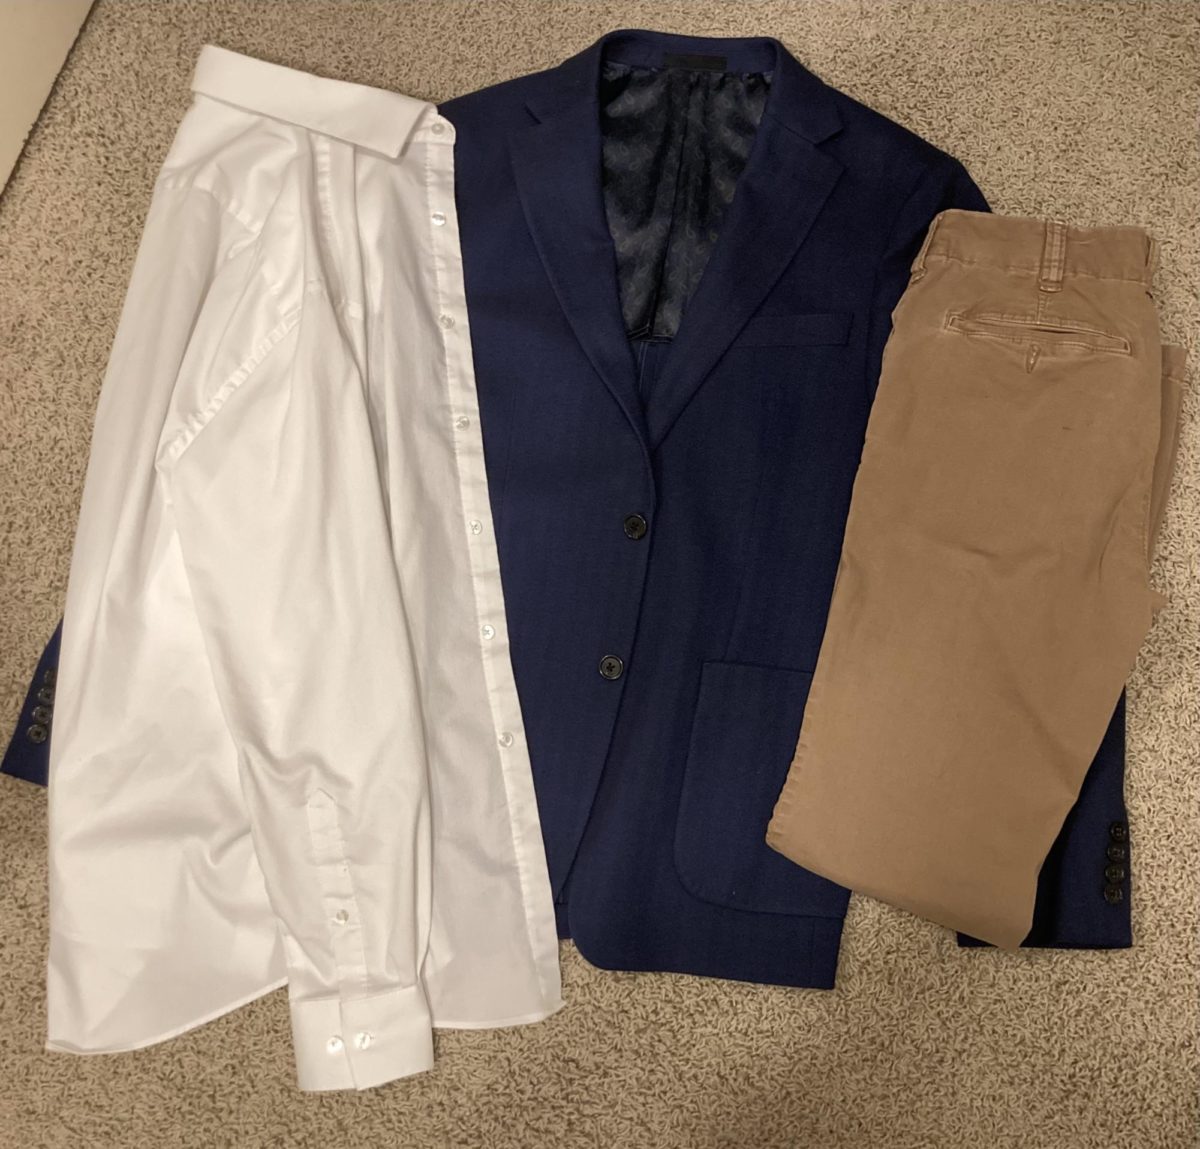 Yousha%E2%80%99s+spectacular+homecoming+outfit+from+last+year%E2%80%99s+dance+consisted+of+a+navy+suit+from+Macy%E2%80%99s%2C+a+white+button+down+from+Nordstrom%2C+and+khakis+from+American+Eagle.